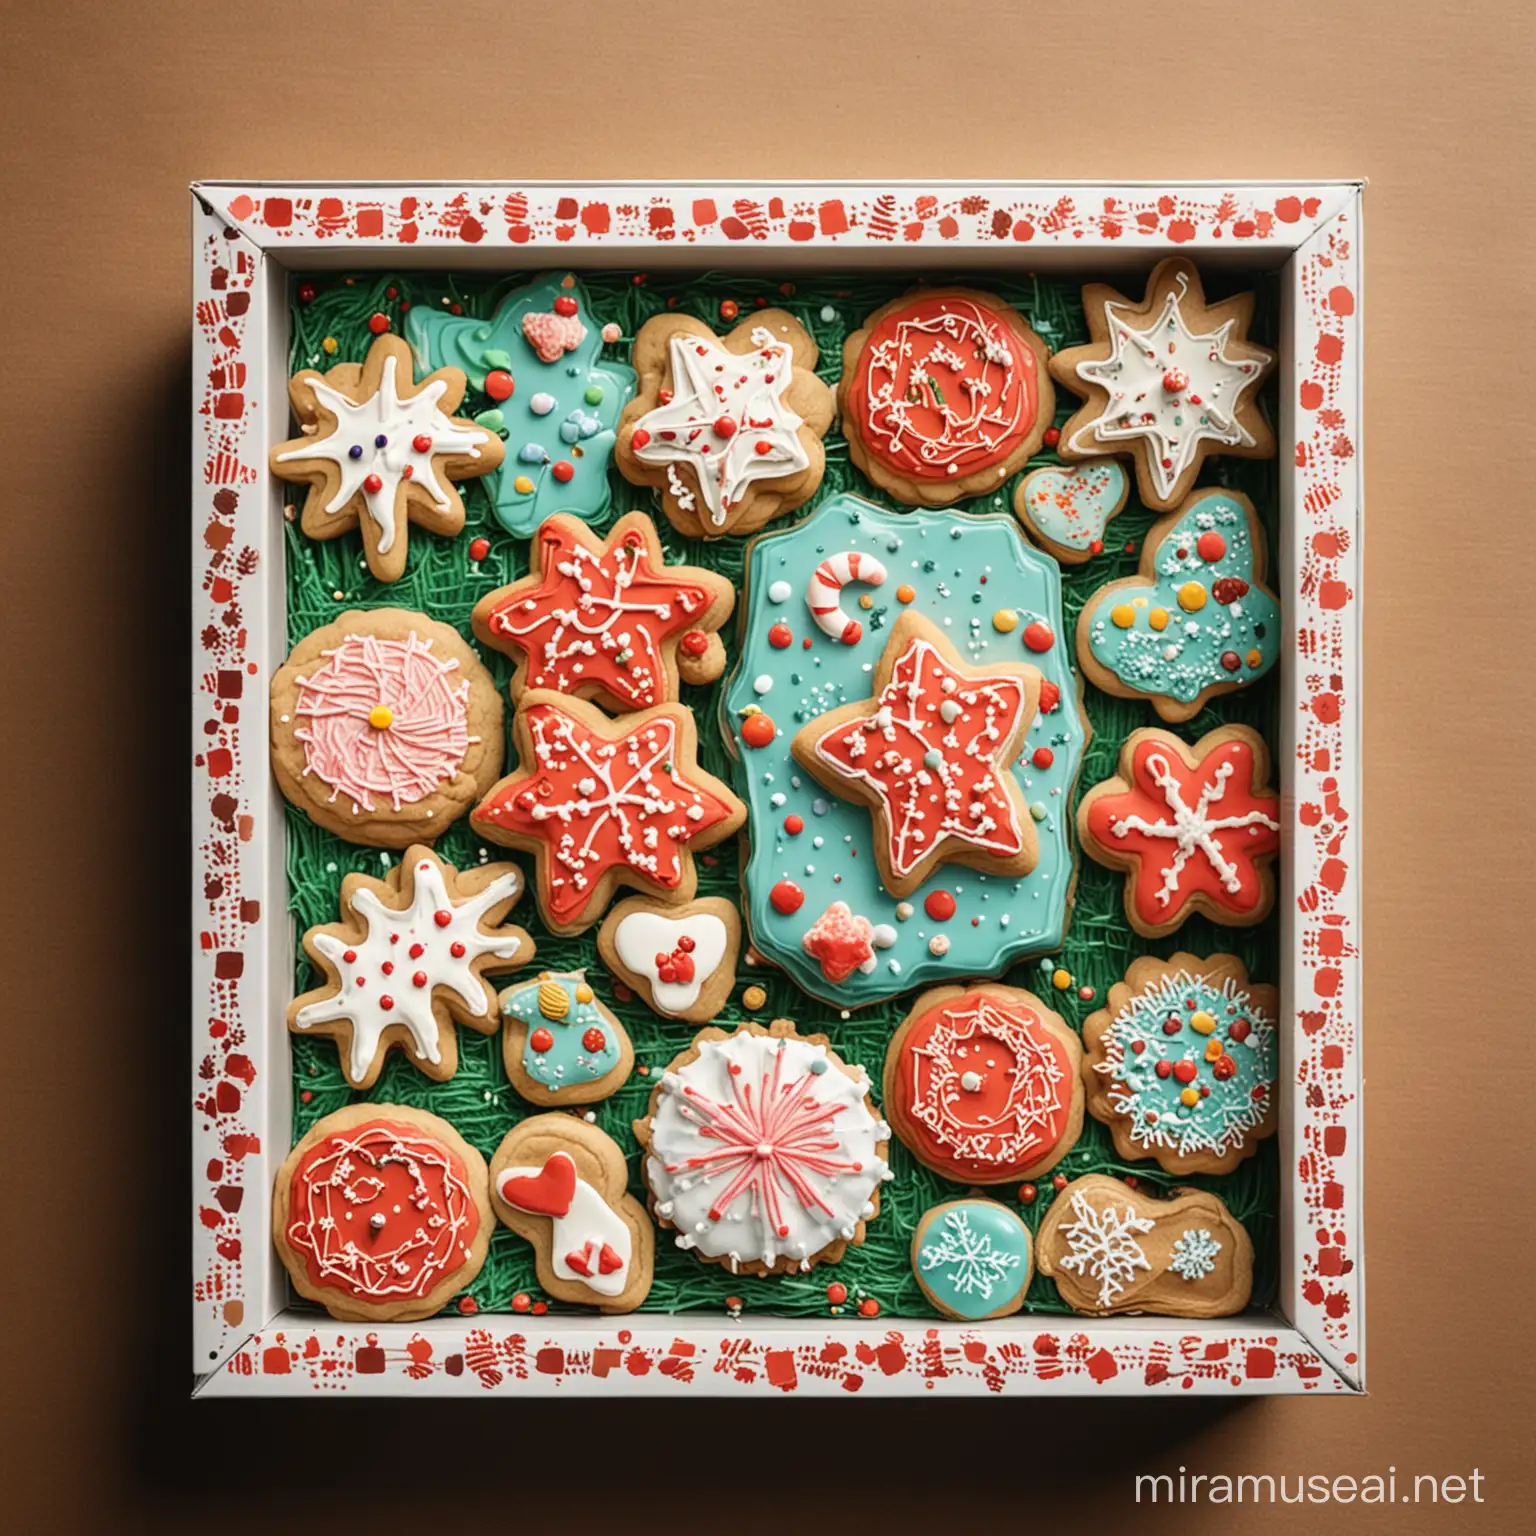 Colorful Decorated Cookie Box on a Festive Background